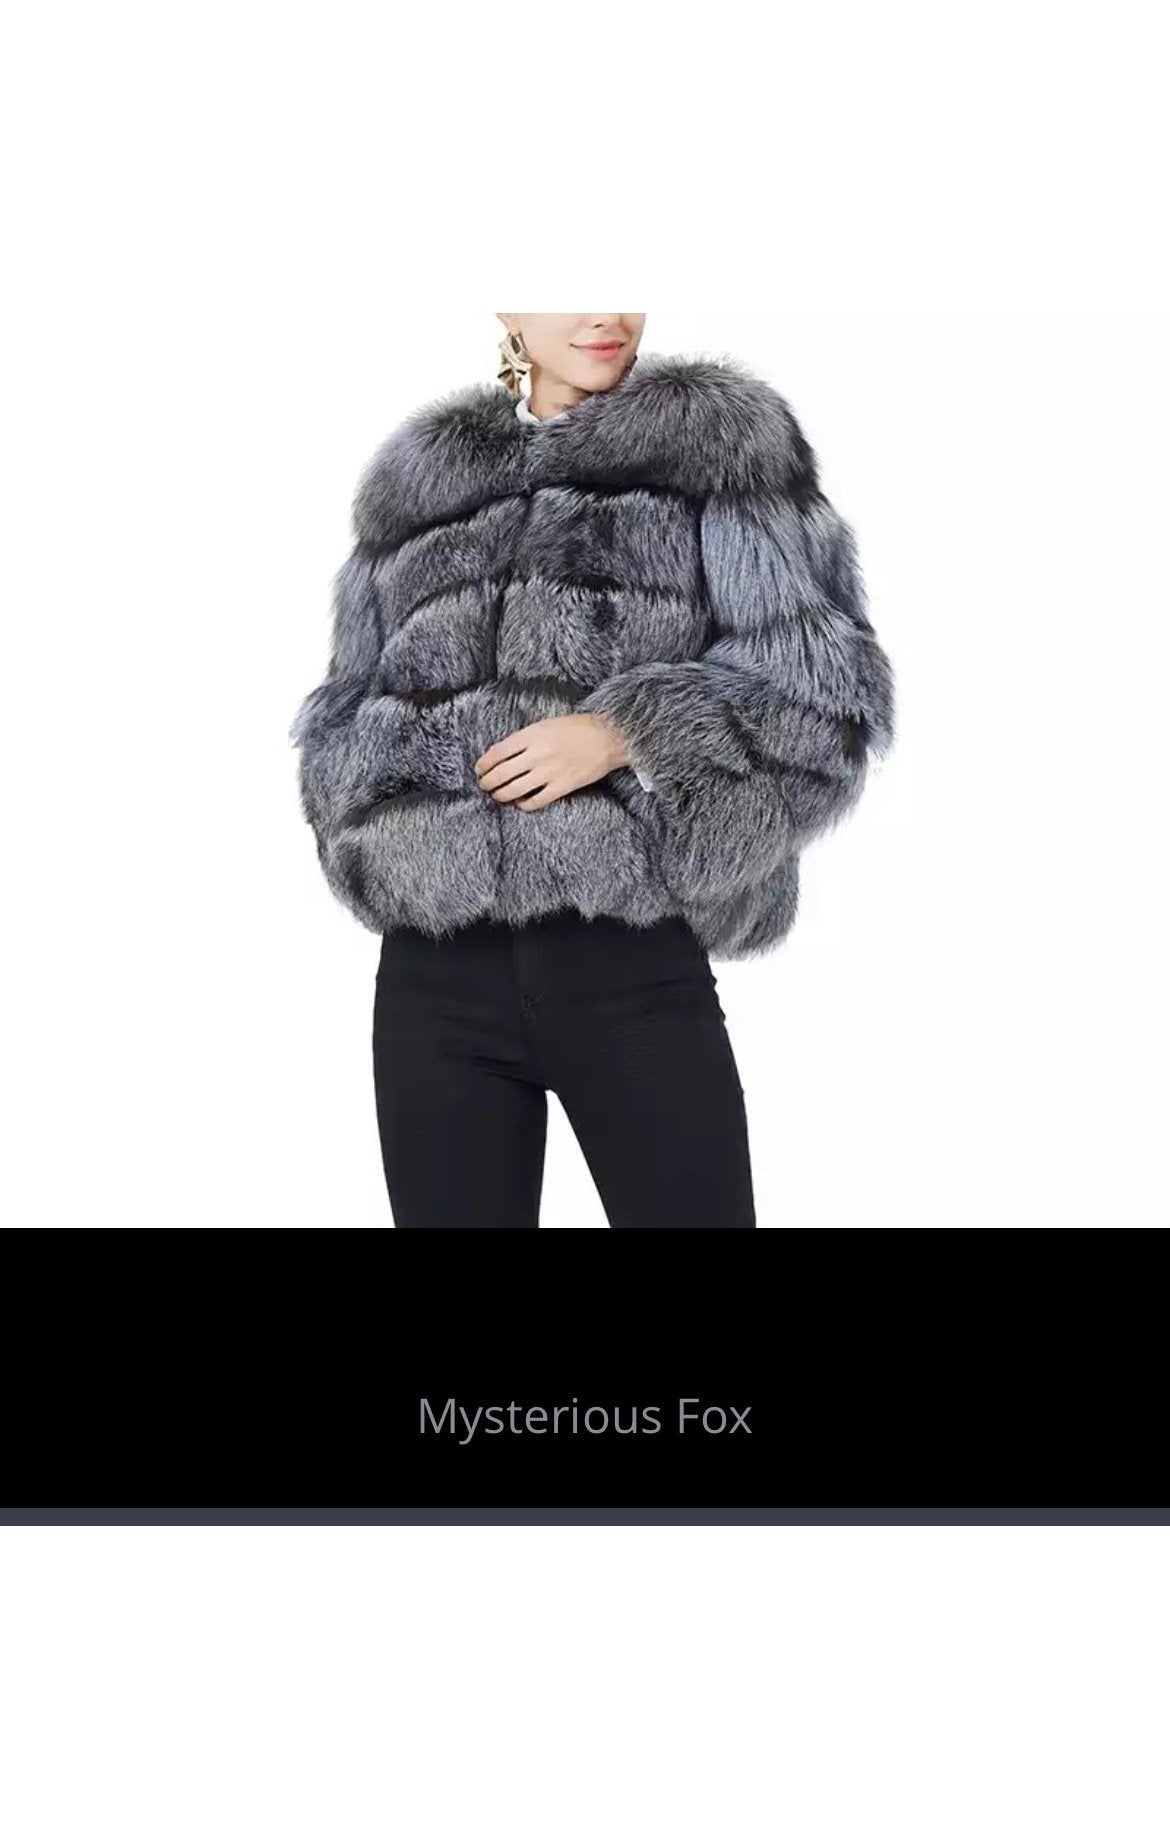 Ladies Fox Coat Natural Fur Winter stylish Plus Sizes Available ( Many COLORS) (Many Sizes)